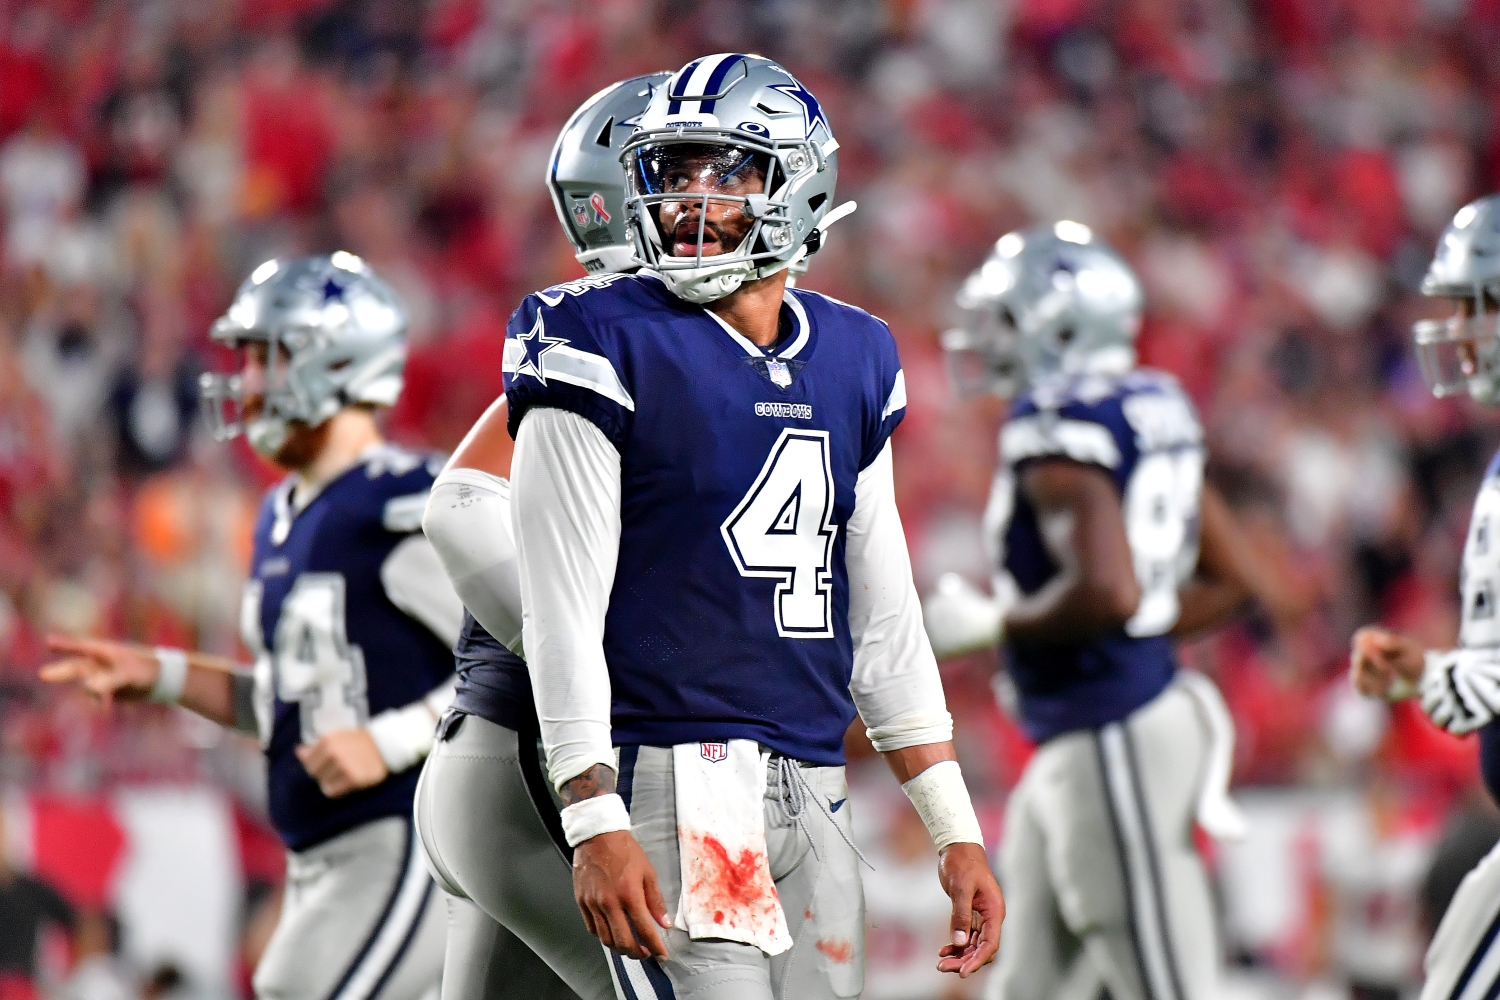 Dallas Cowboys quarterback Dak Prescott looks on during a game against the Tampa Bay Buccaneers from Week 1 of the 2021 NFL season.